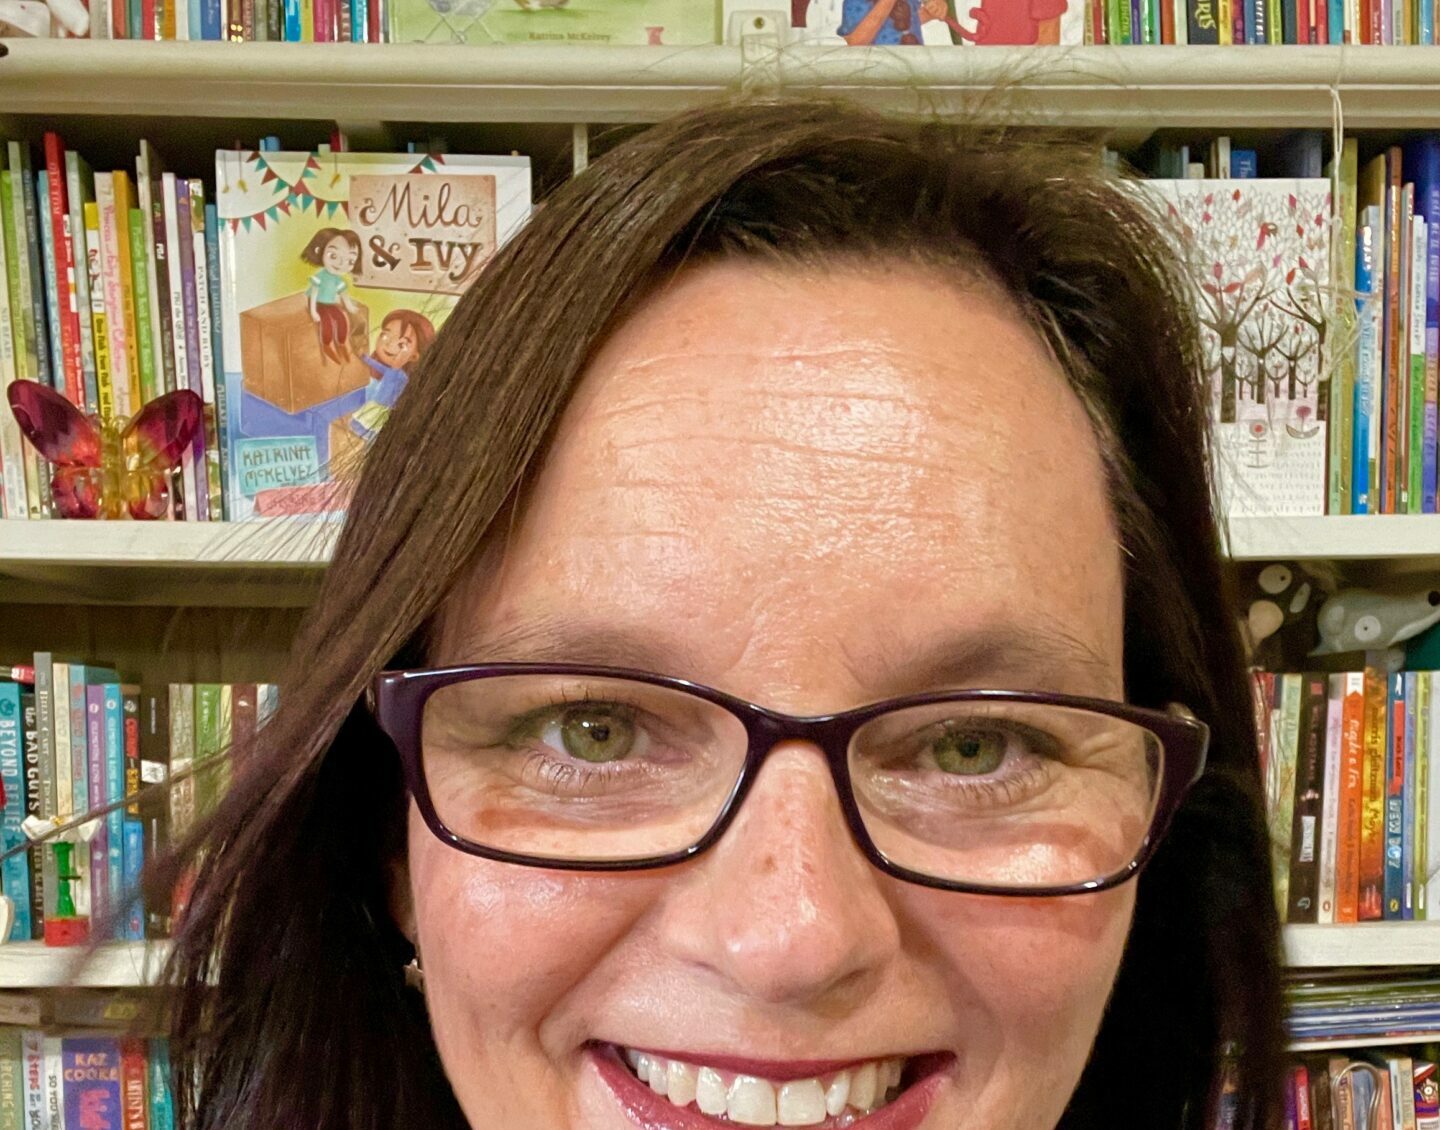 A close-up image of a white woman with long straight brown hair and glasses, smiling in front of a bookshelf